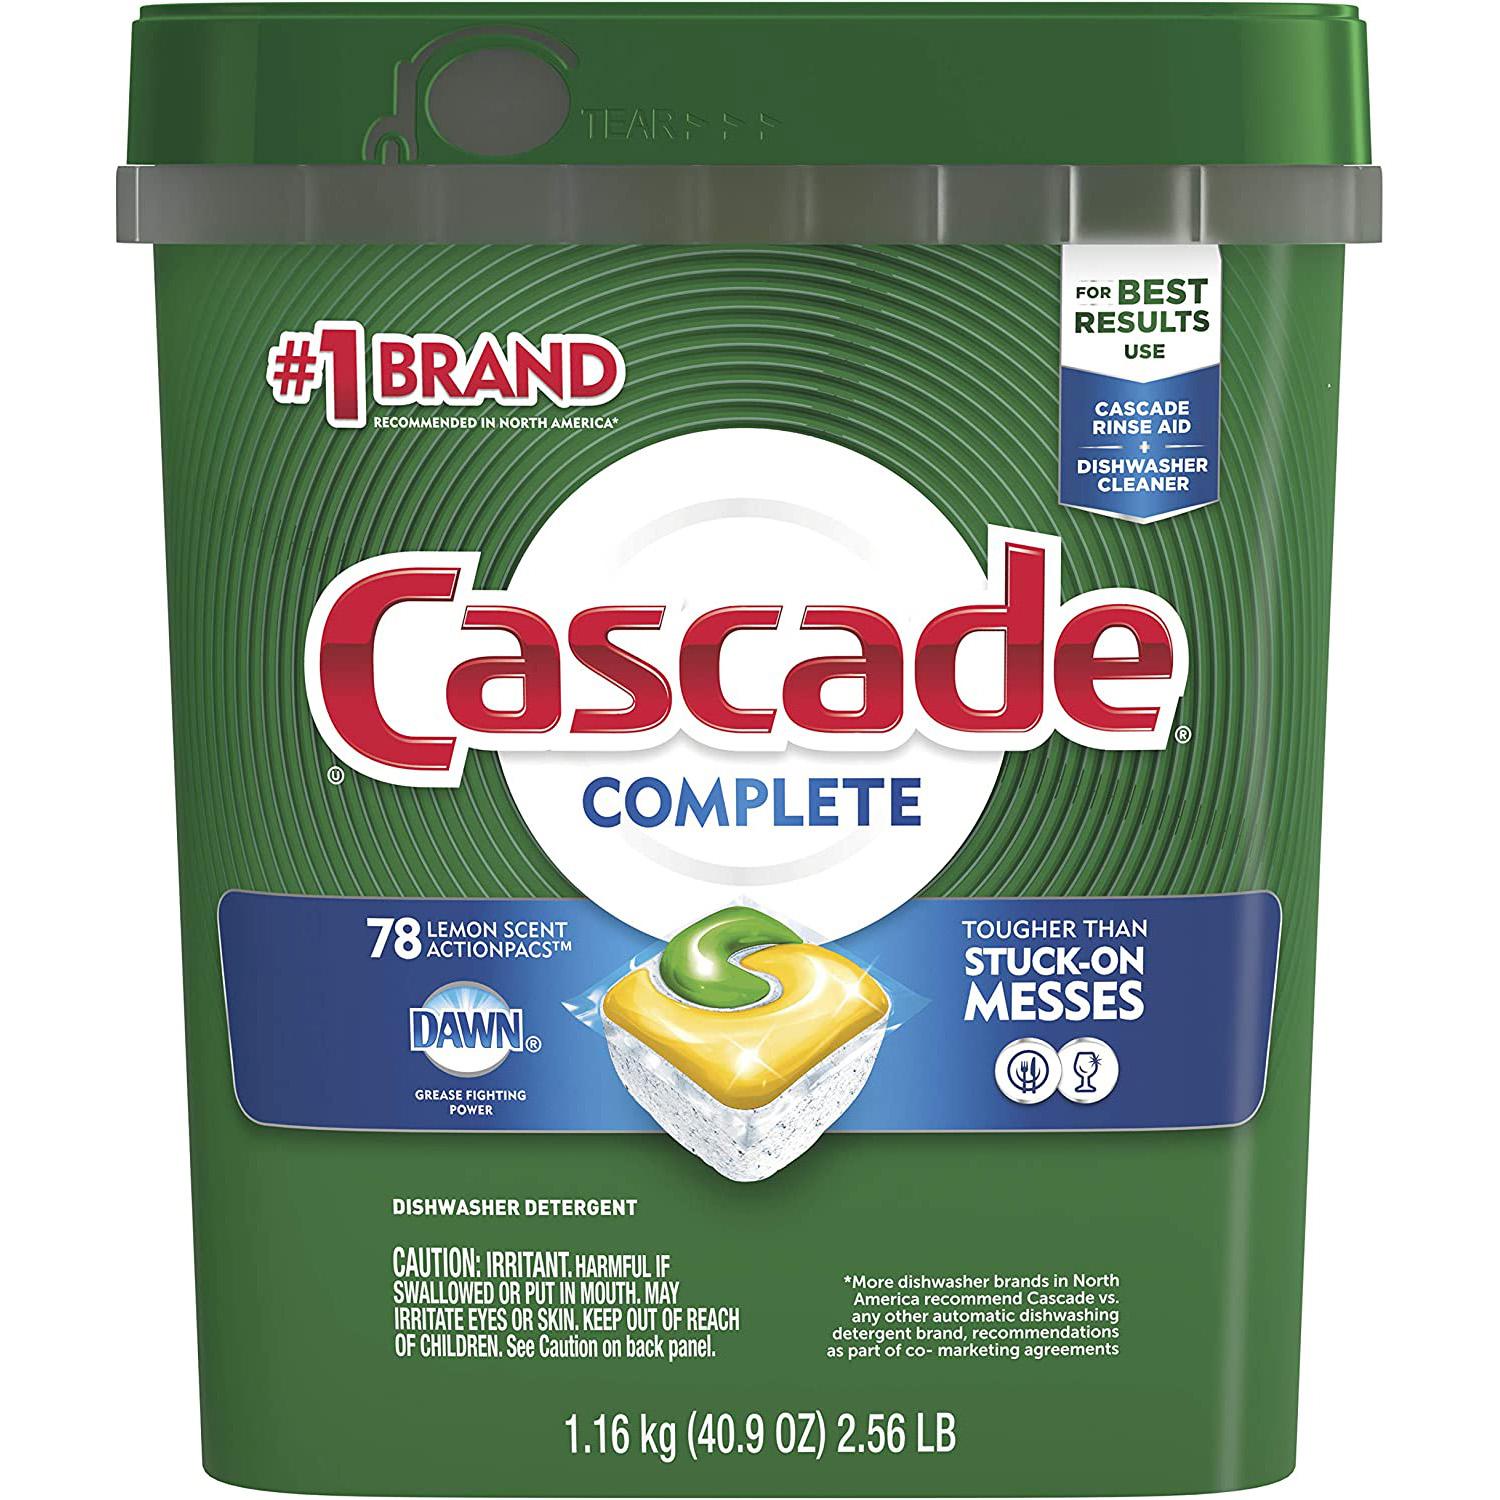 234 Cascade Complete ActionPacs Dishwasher Detergent for $34.32 Shipped